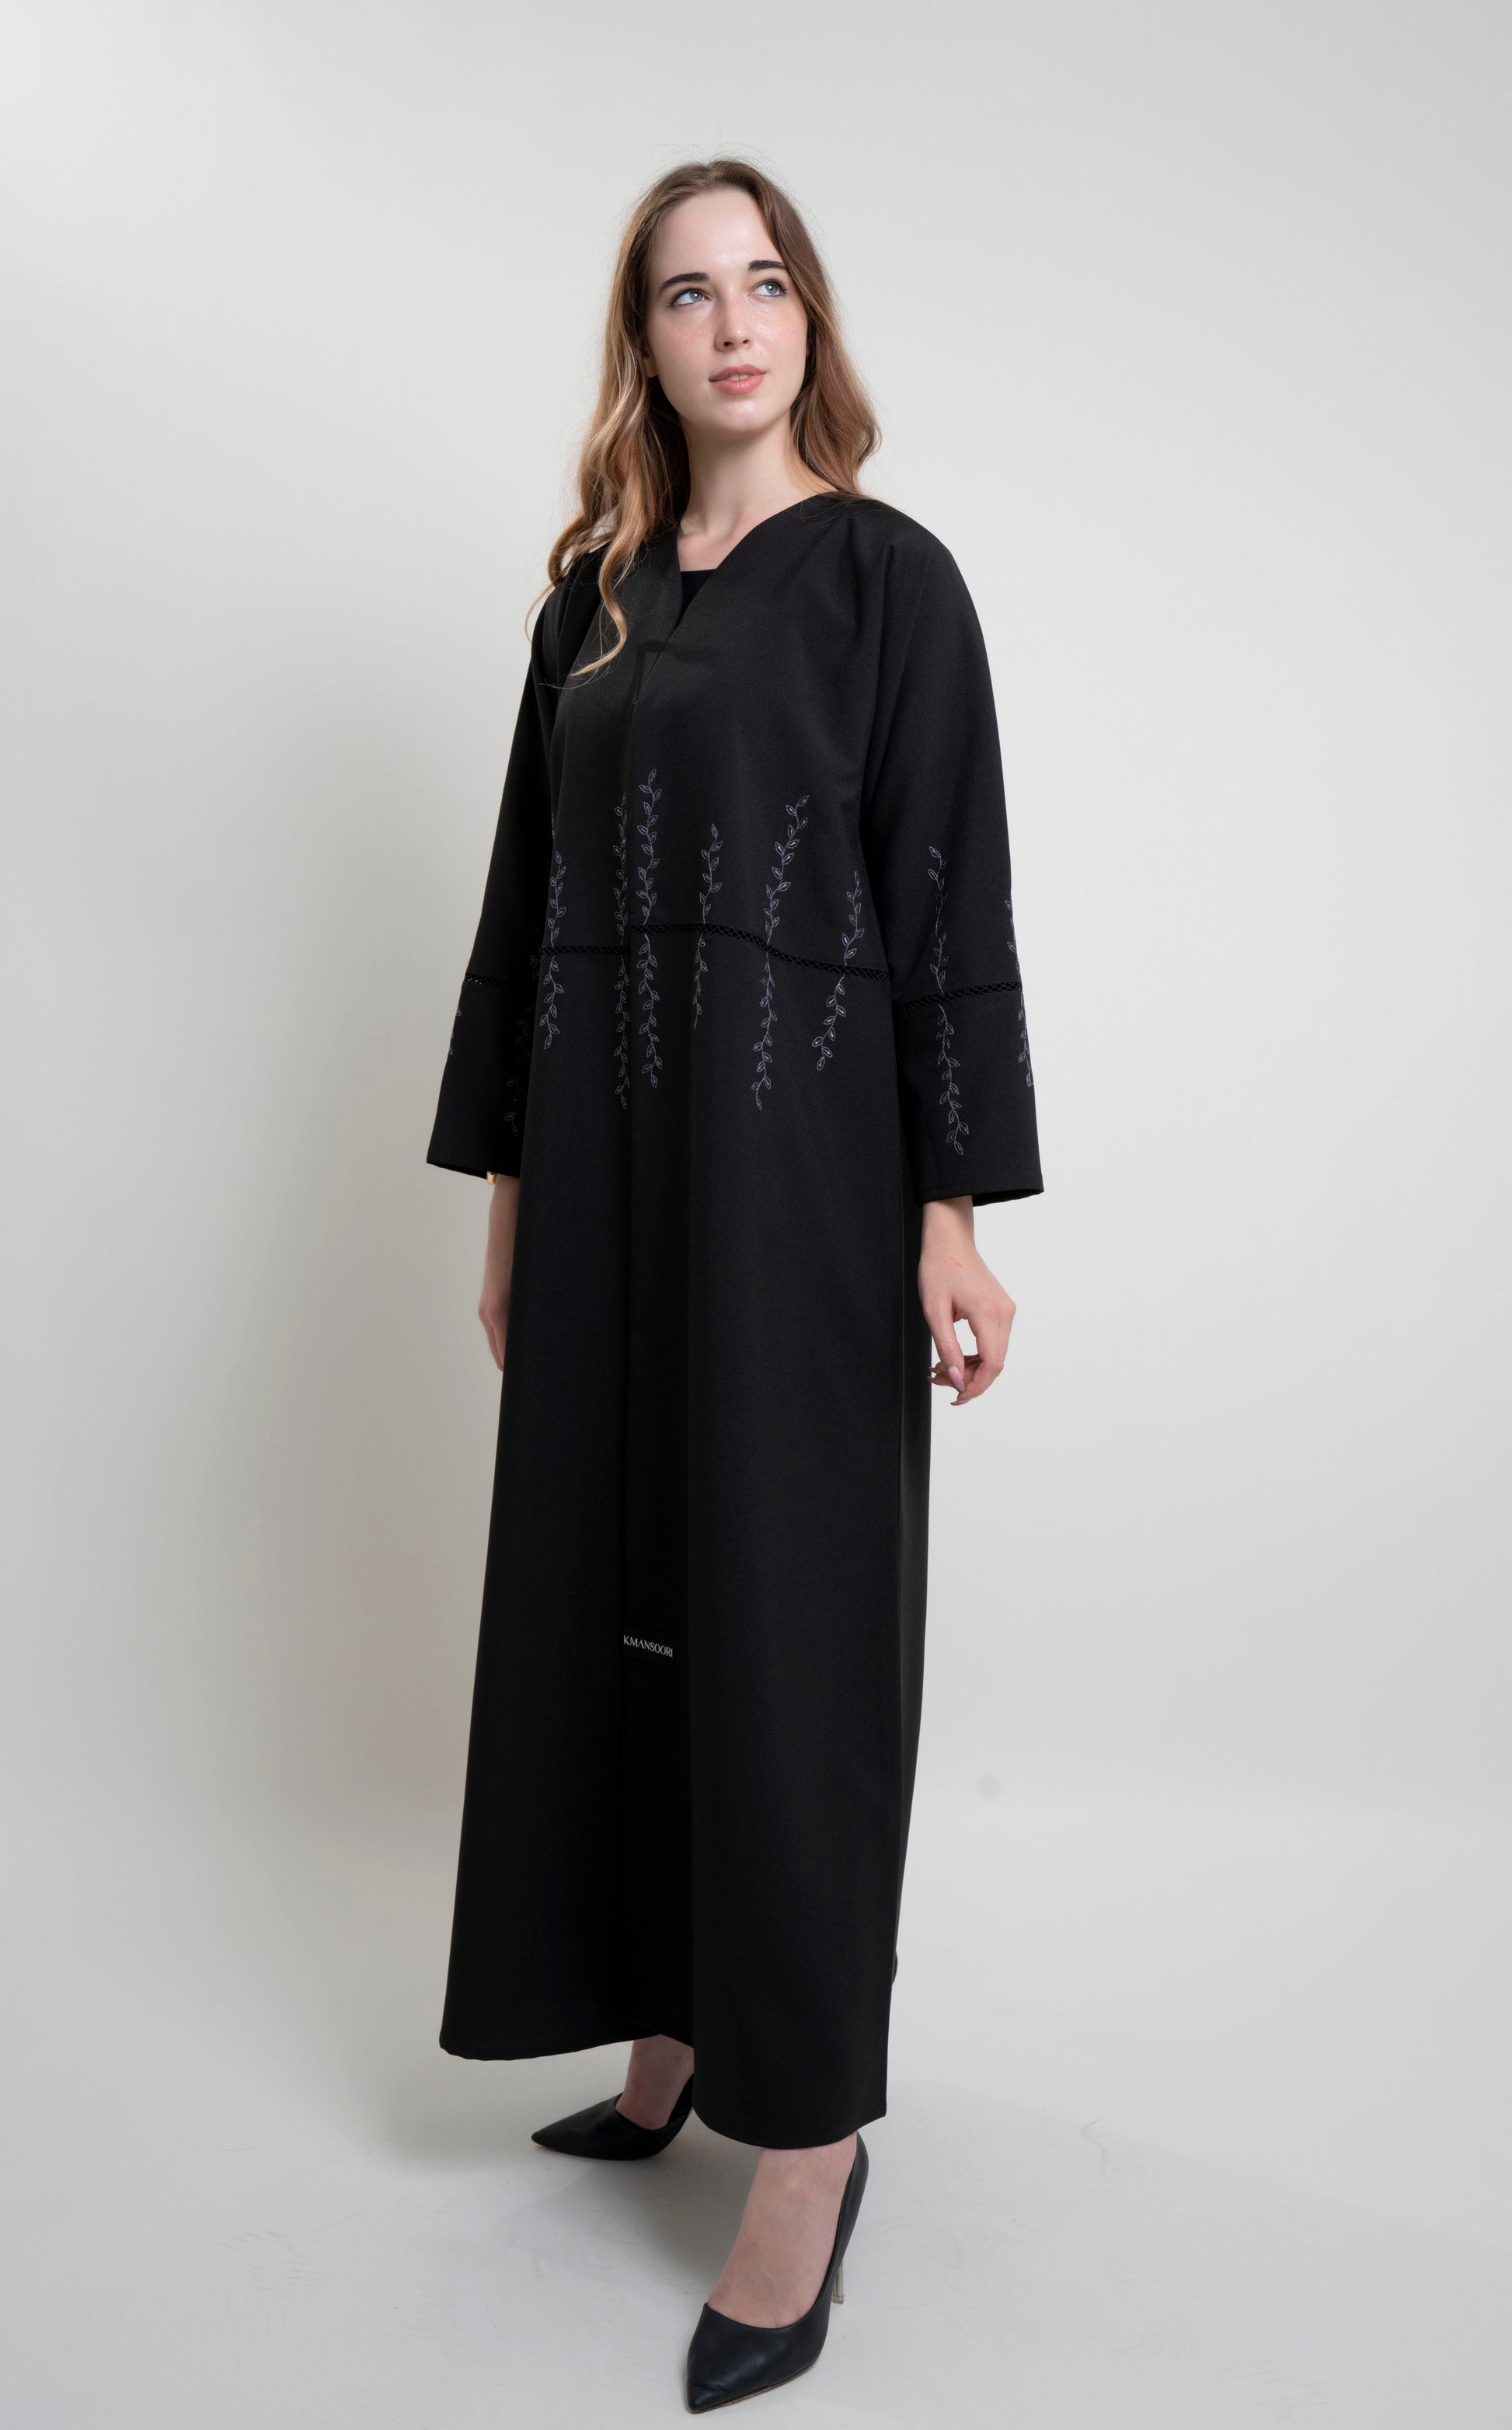 Black abaya with gray color leaf embroidery on front and sleeves